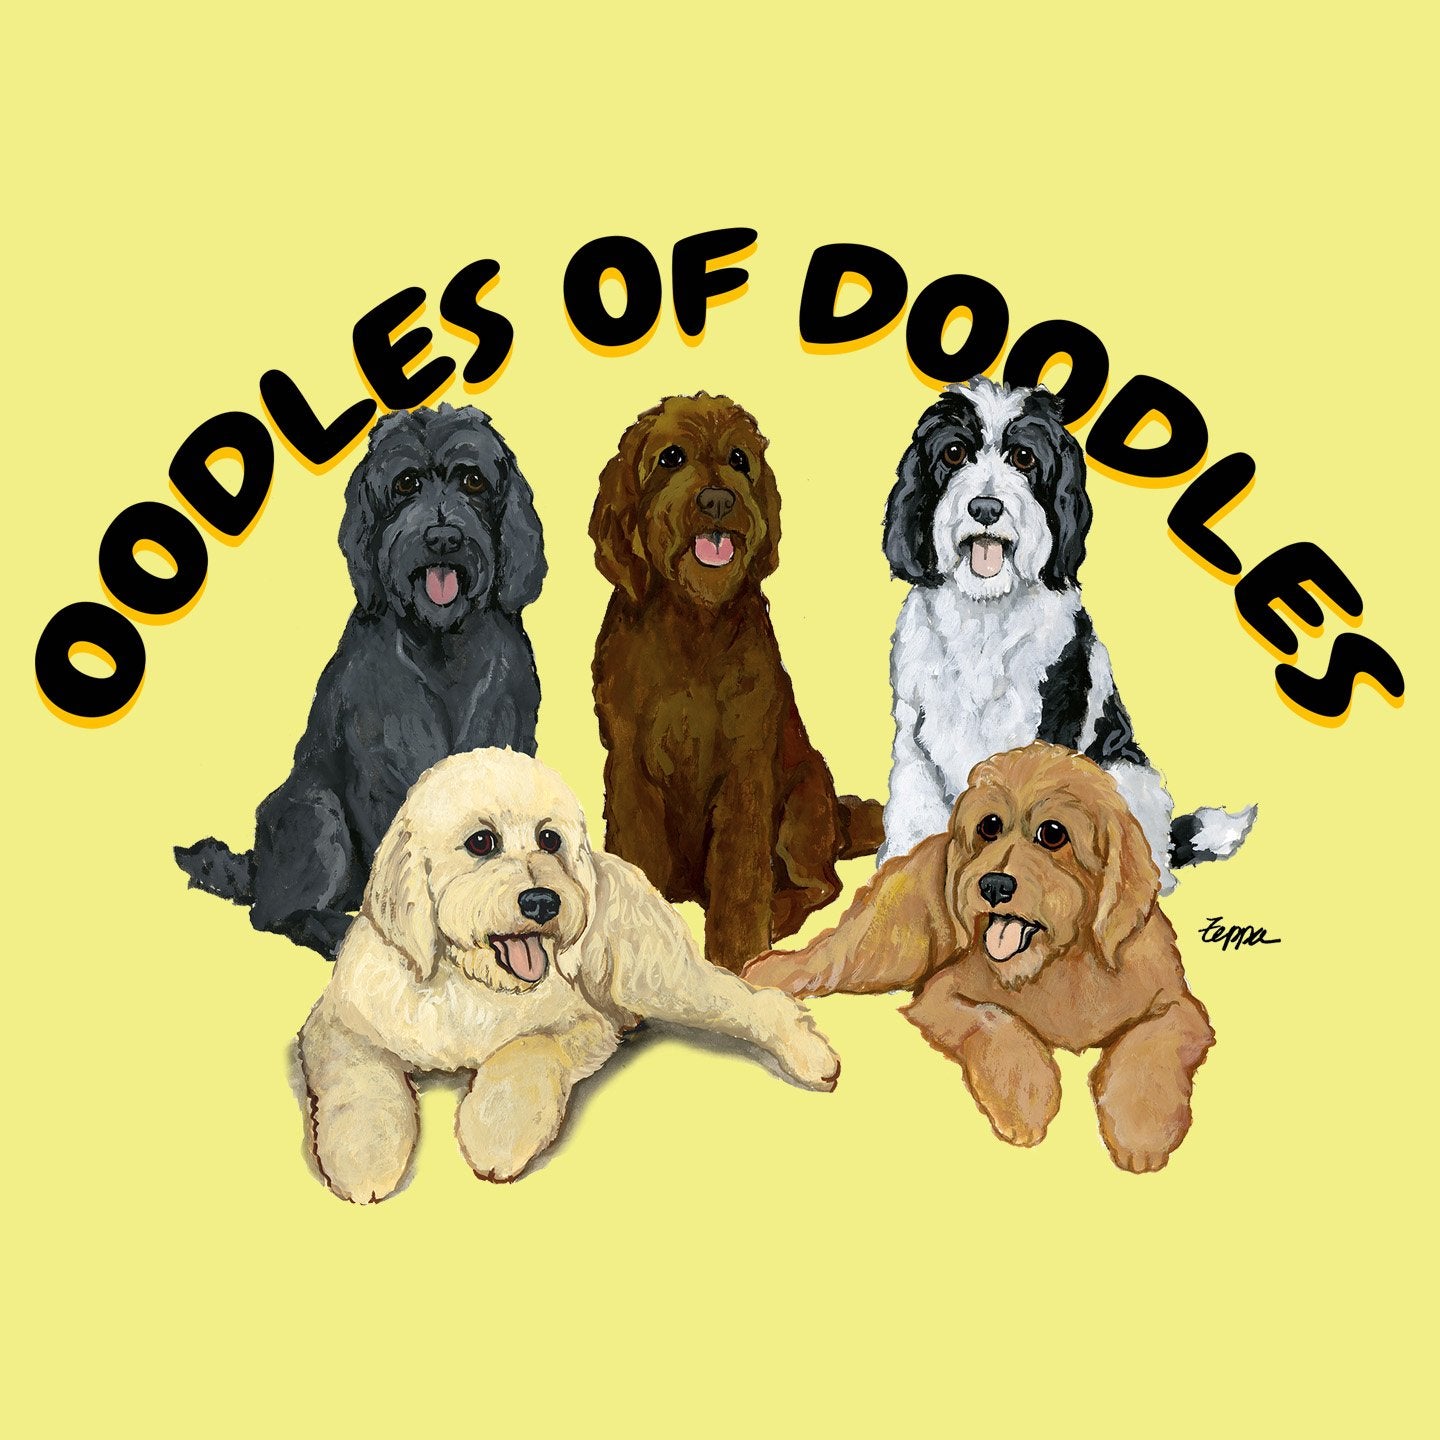 Oodles of Doodles - Women's Fitted T-Shirt